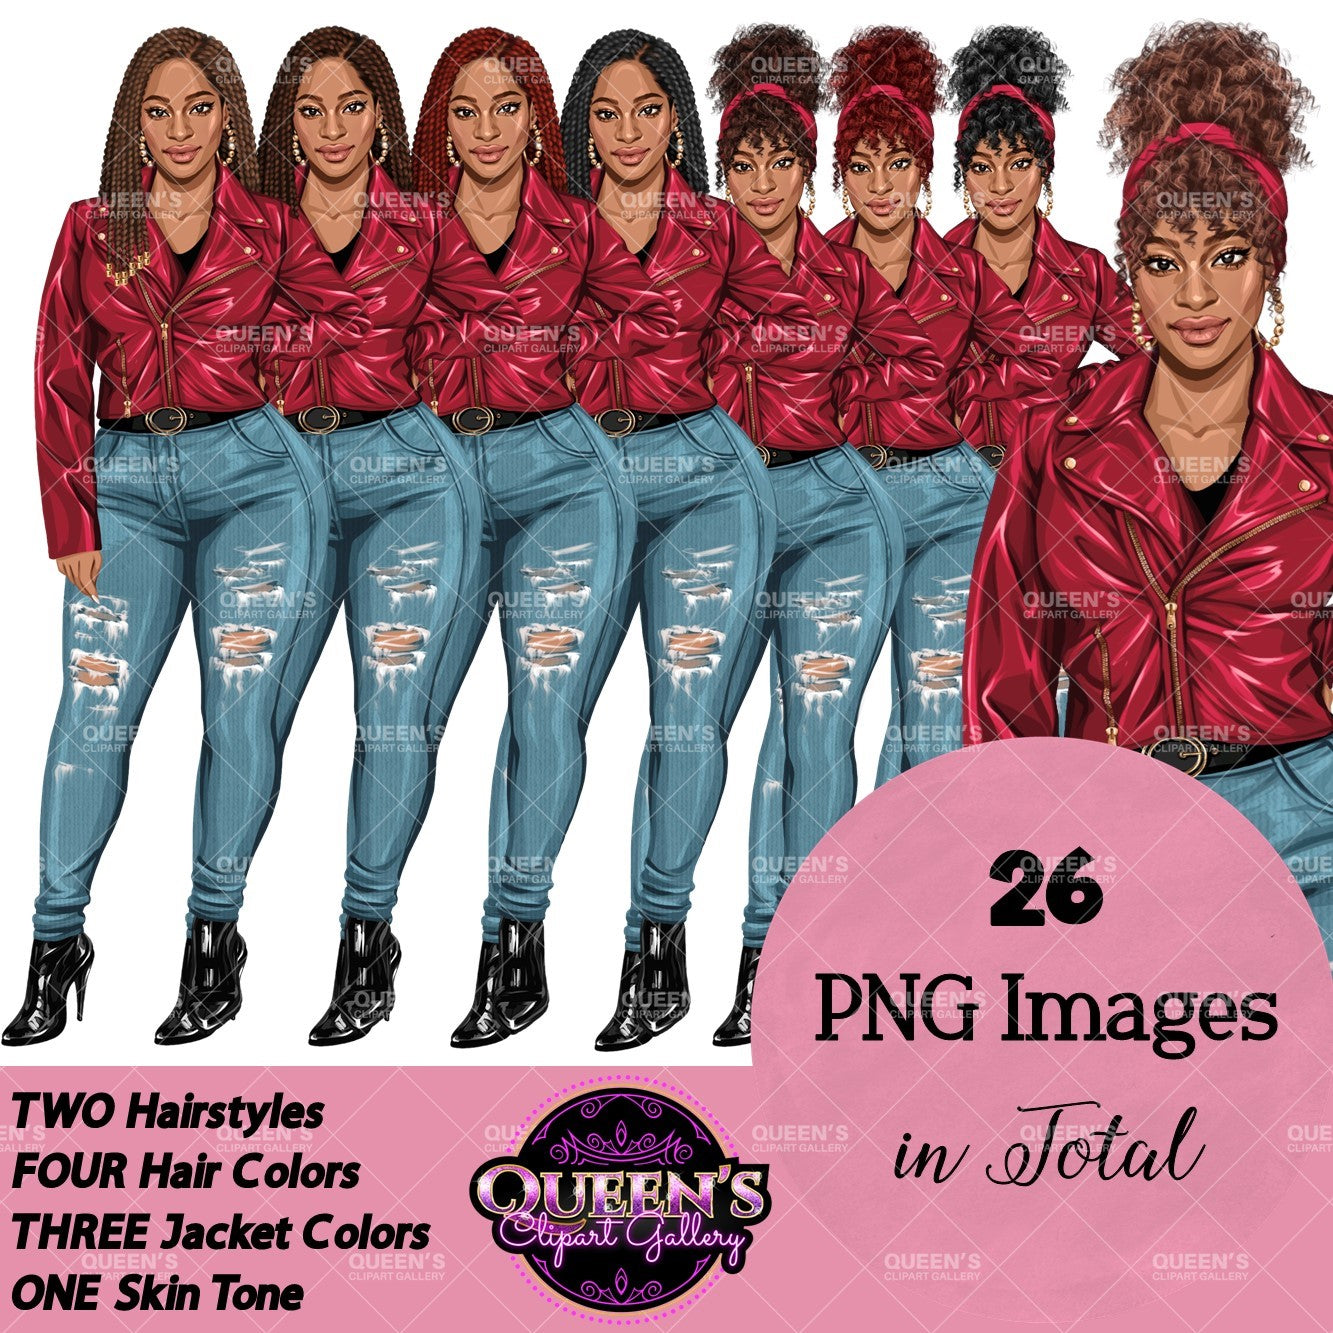 Denim girl clipart, Fashion girl clipart, Jeans girl clipart, Fashion illustration, Curvy girl clipart, Afro girl, African American woman